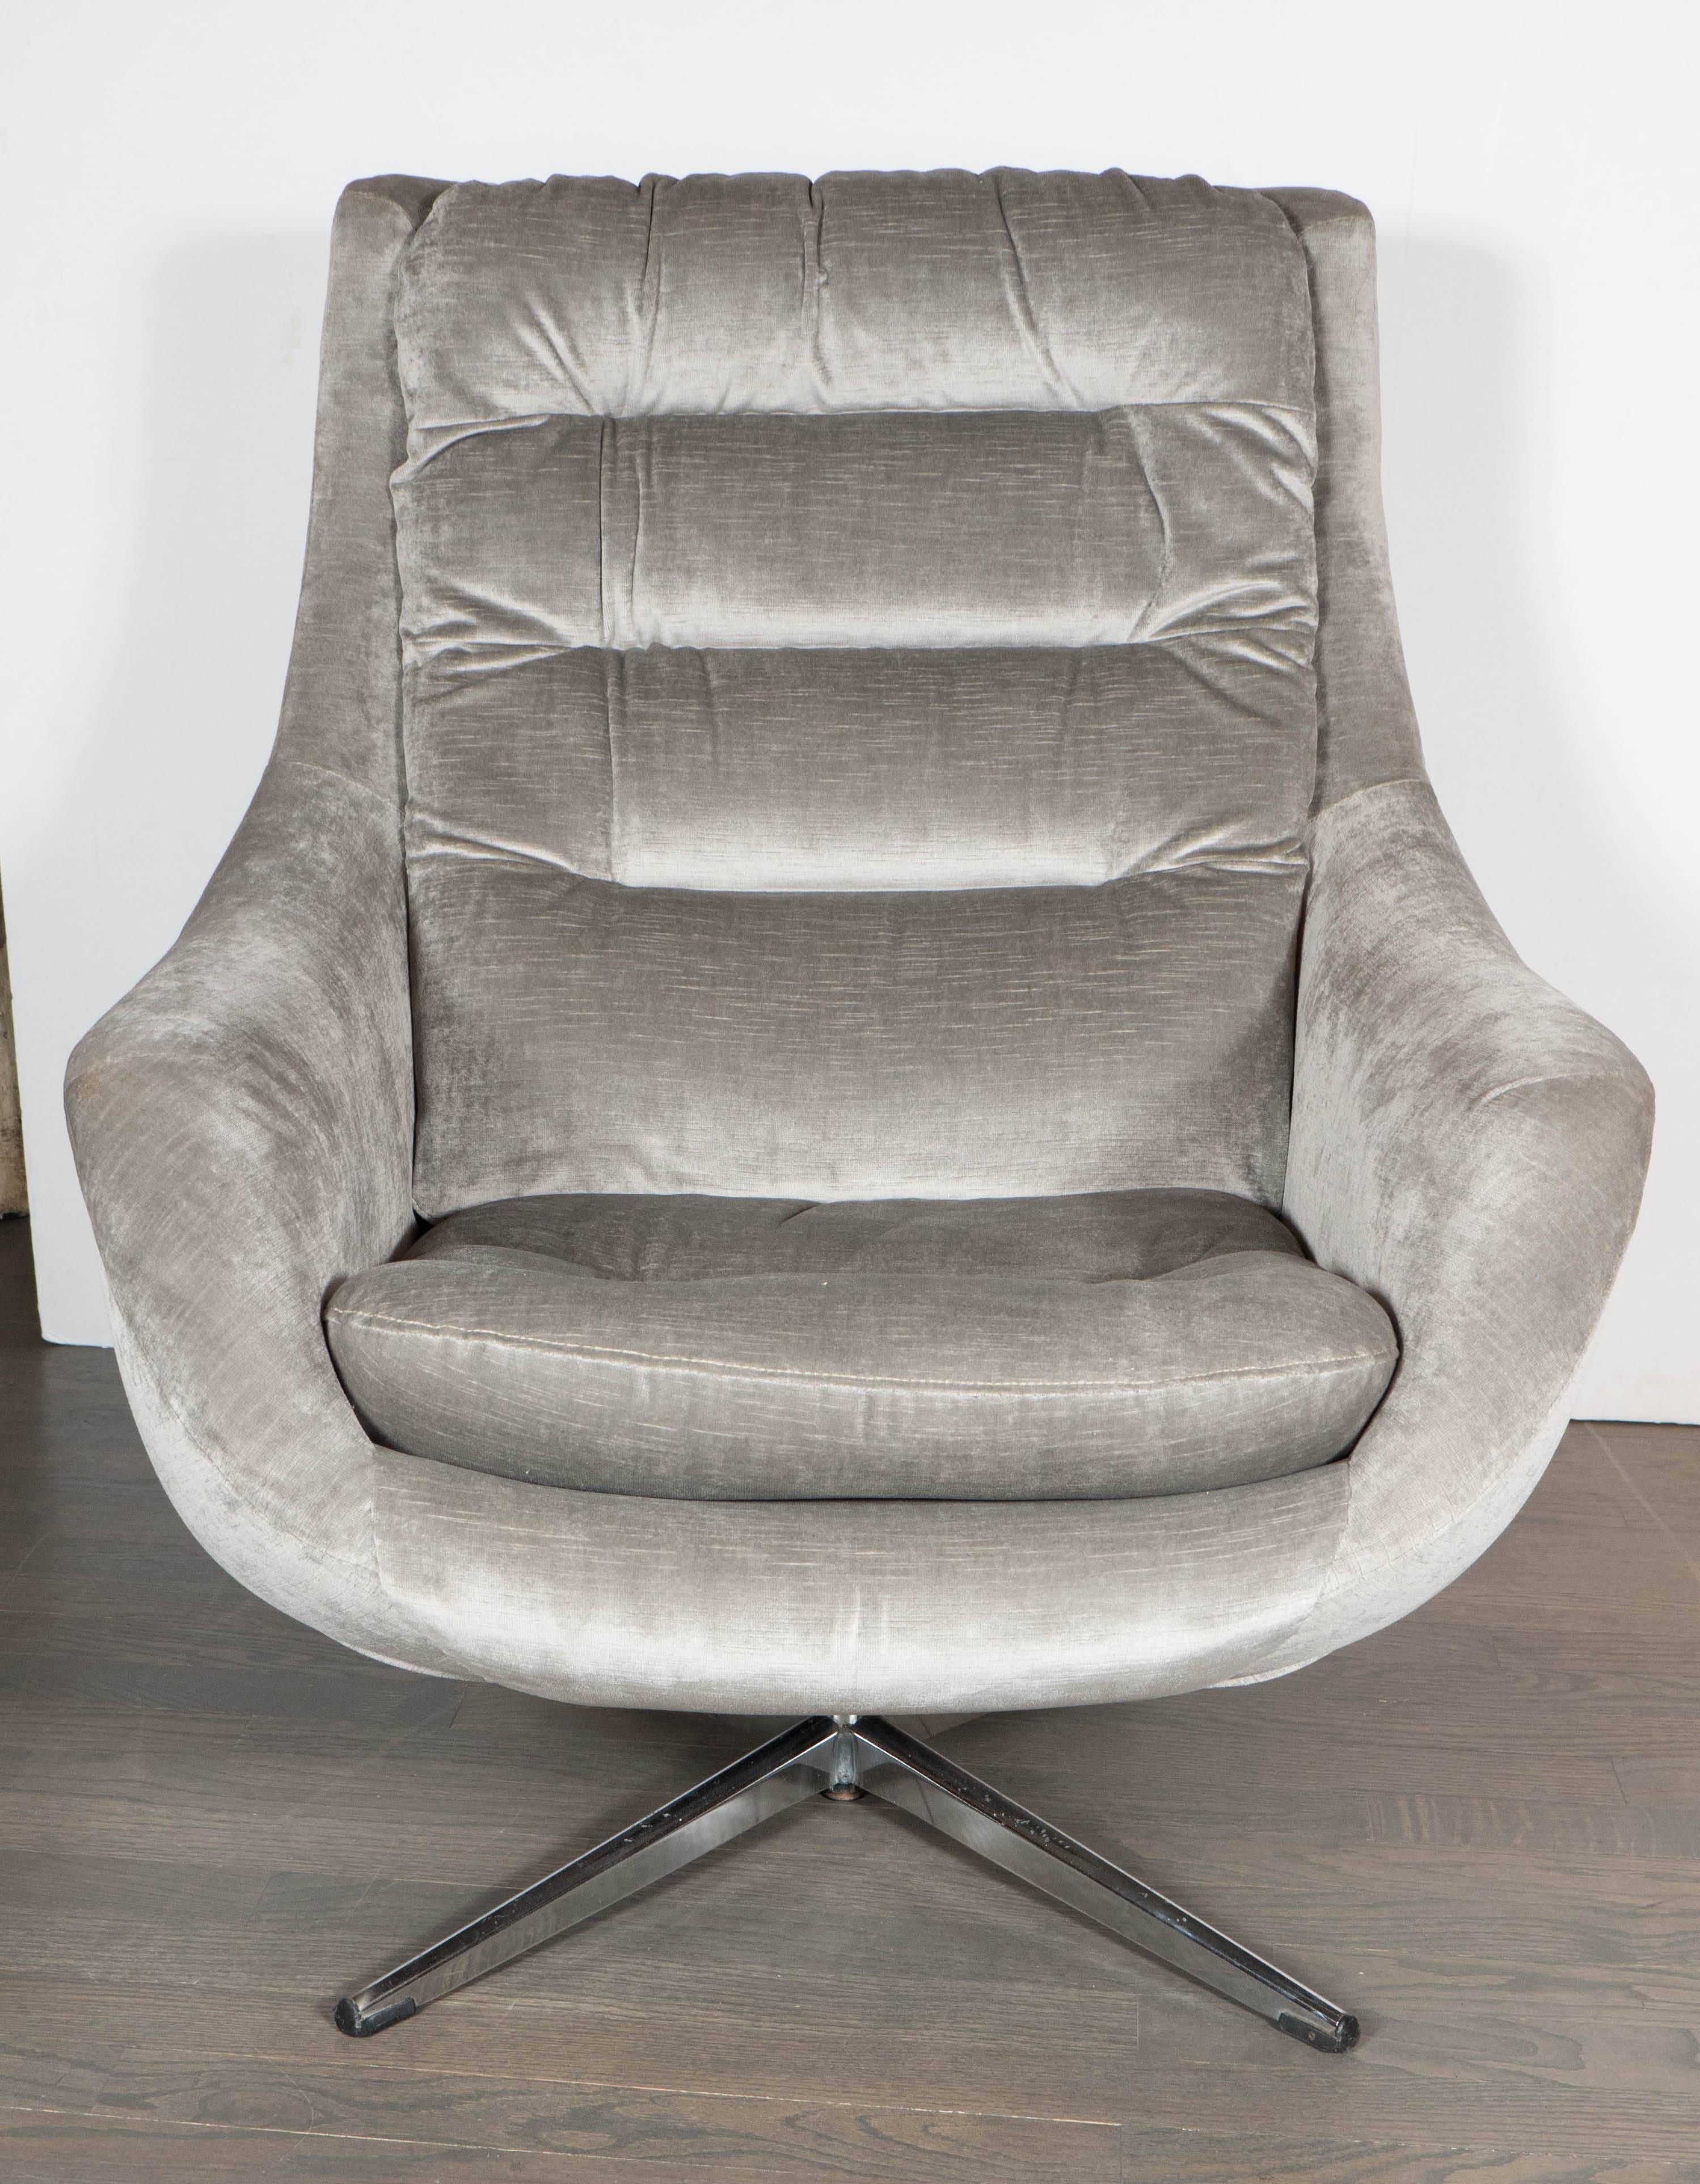 A chic Mid-Century Modernist curved high back swivel chair, newly upholstered in a luxe platinum velvet upholstery. Features a tufted back and seat cushion. A four-pronged steel base supports the piece. Wide, rounded armrests make for a very